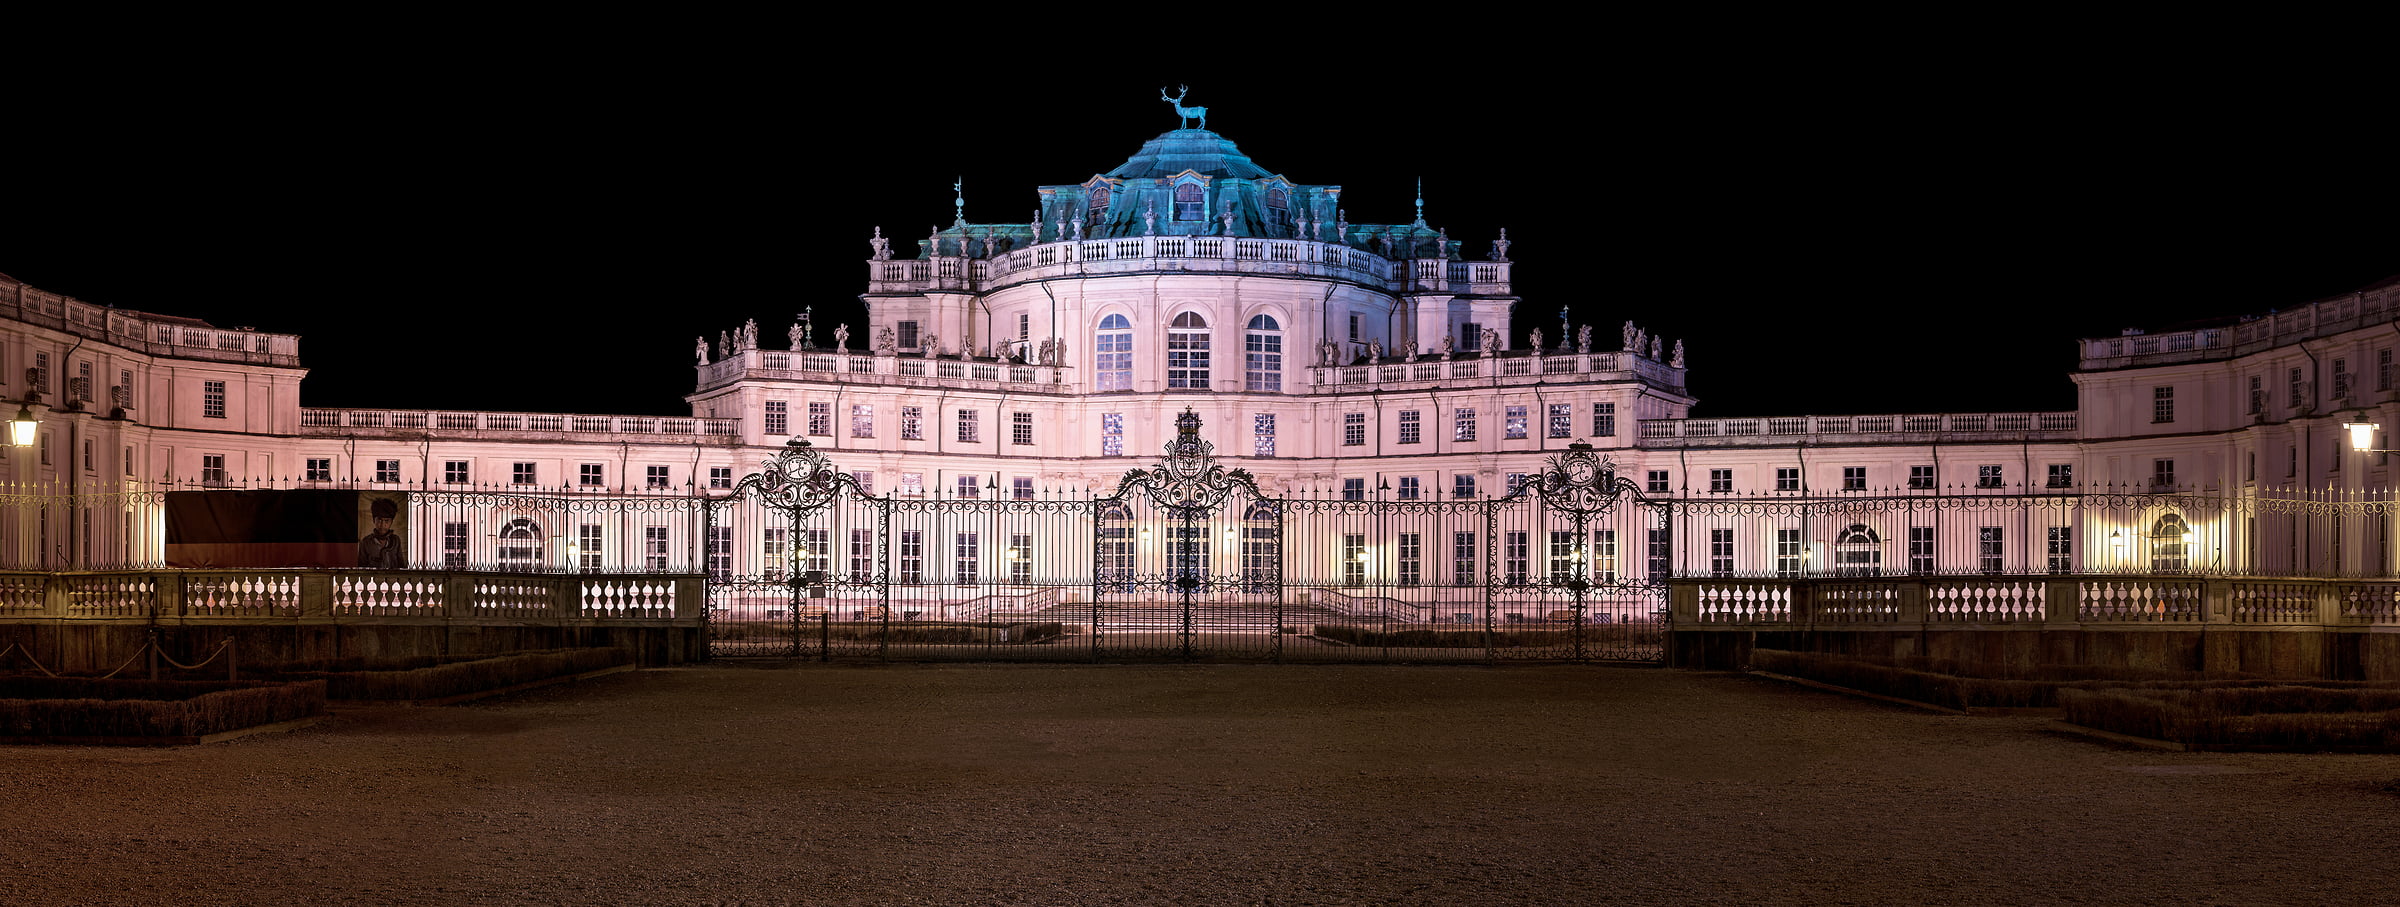 437 megapixels! A very high resolution, large-format VAST photo print of Stupinigi Hunting Lodge; photograph created by Duilio Fiorille in Stupinigi, Piedmont, Italy.